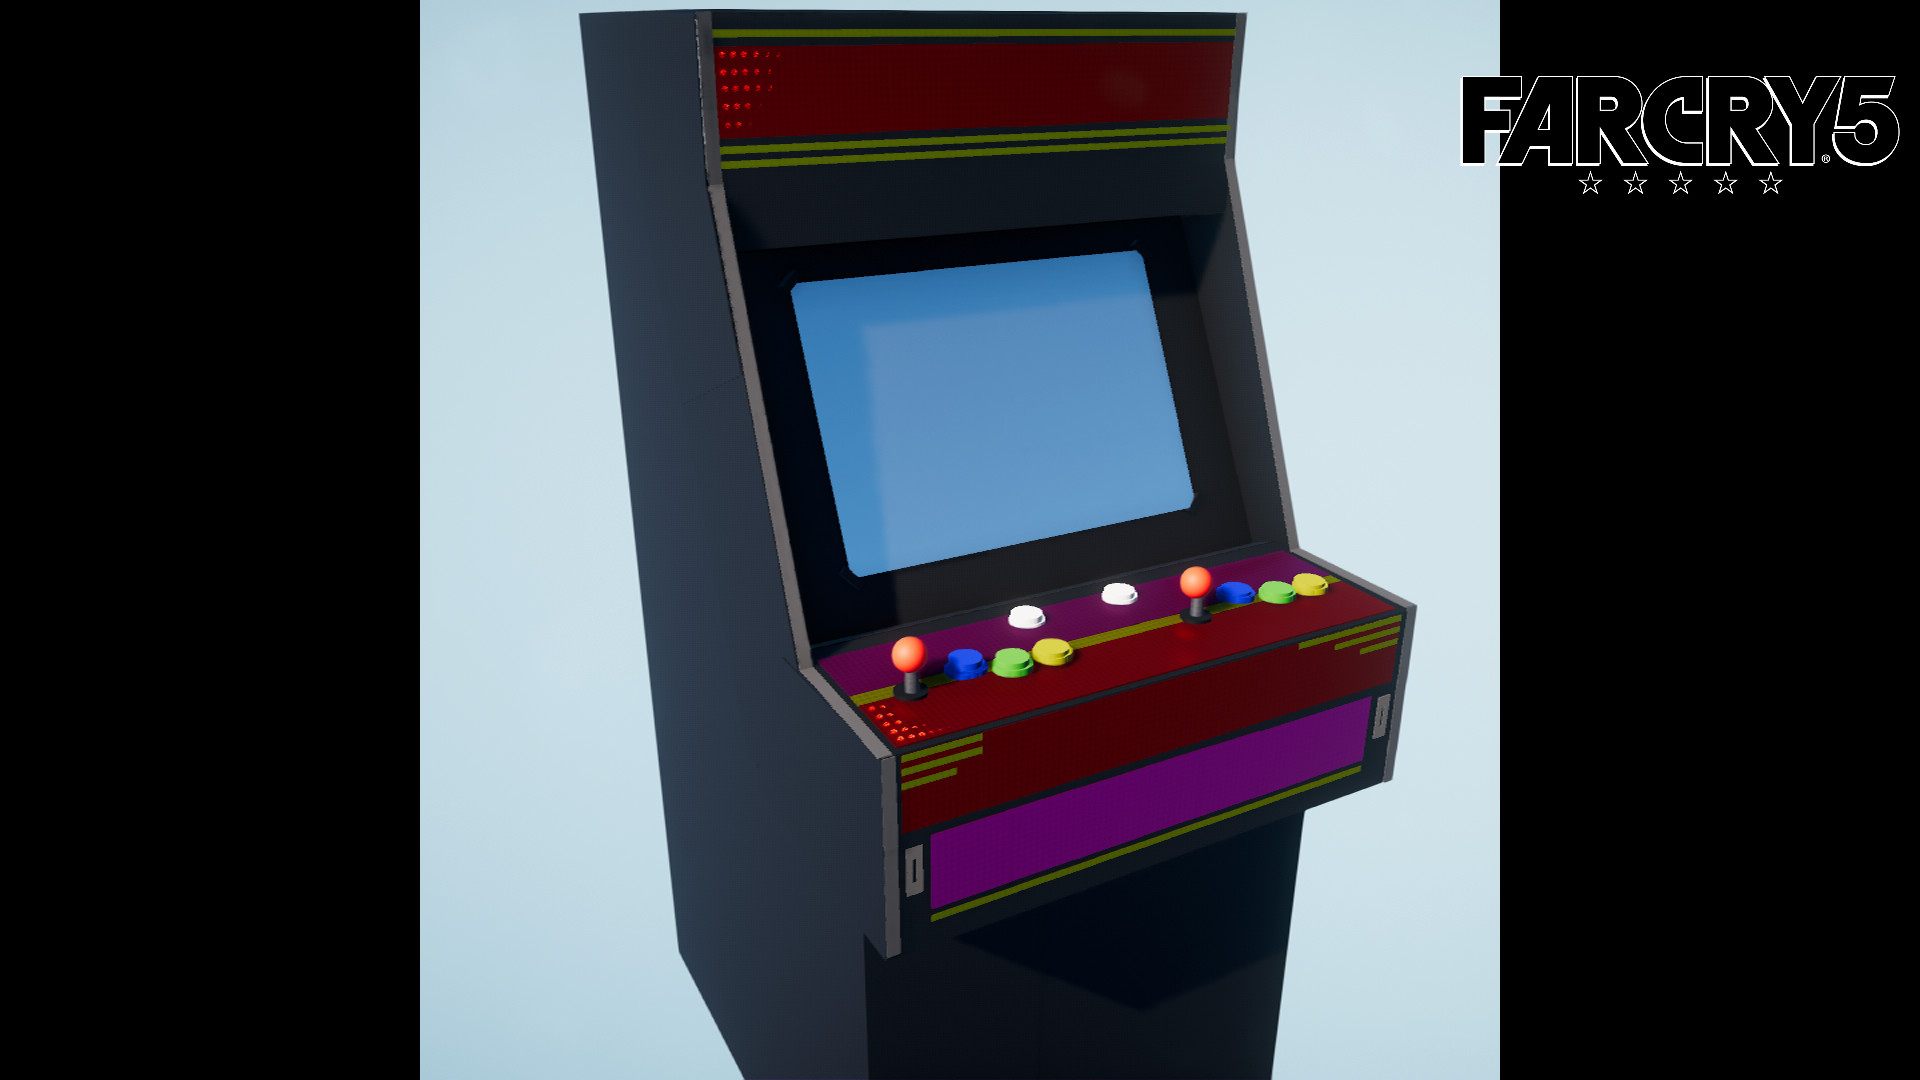 1920x1080 Far Cry 5A classic arcade machine i created in the far cry 5 map editor.  created on xb1 by AW LOST SOLDIER.